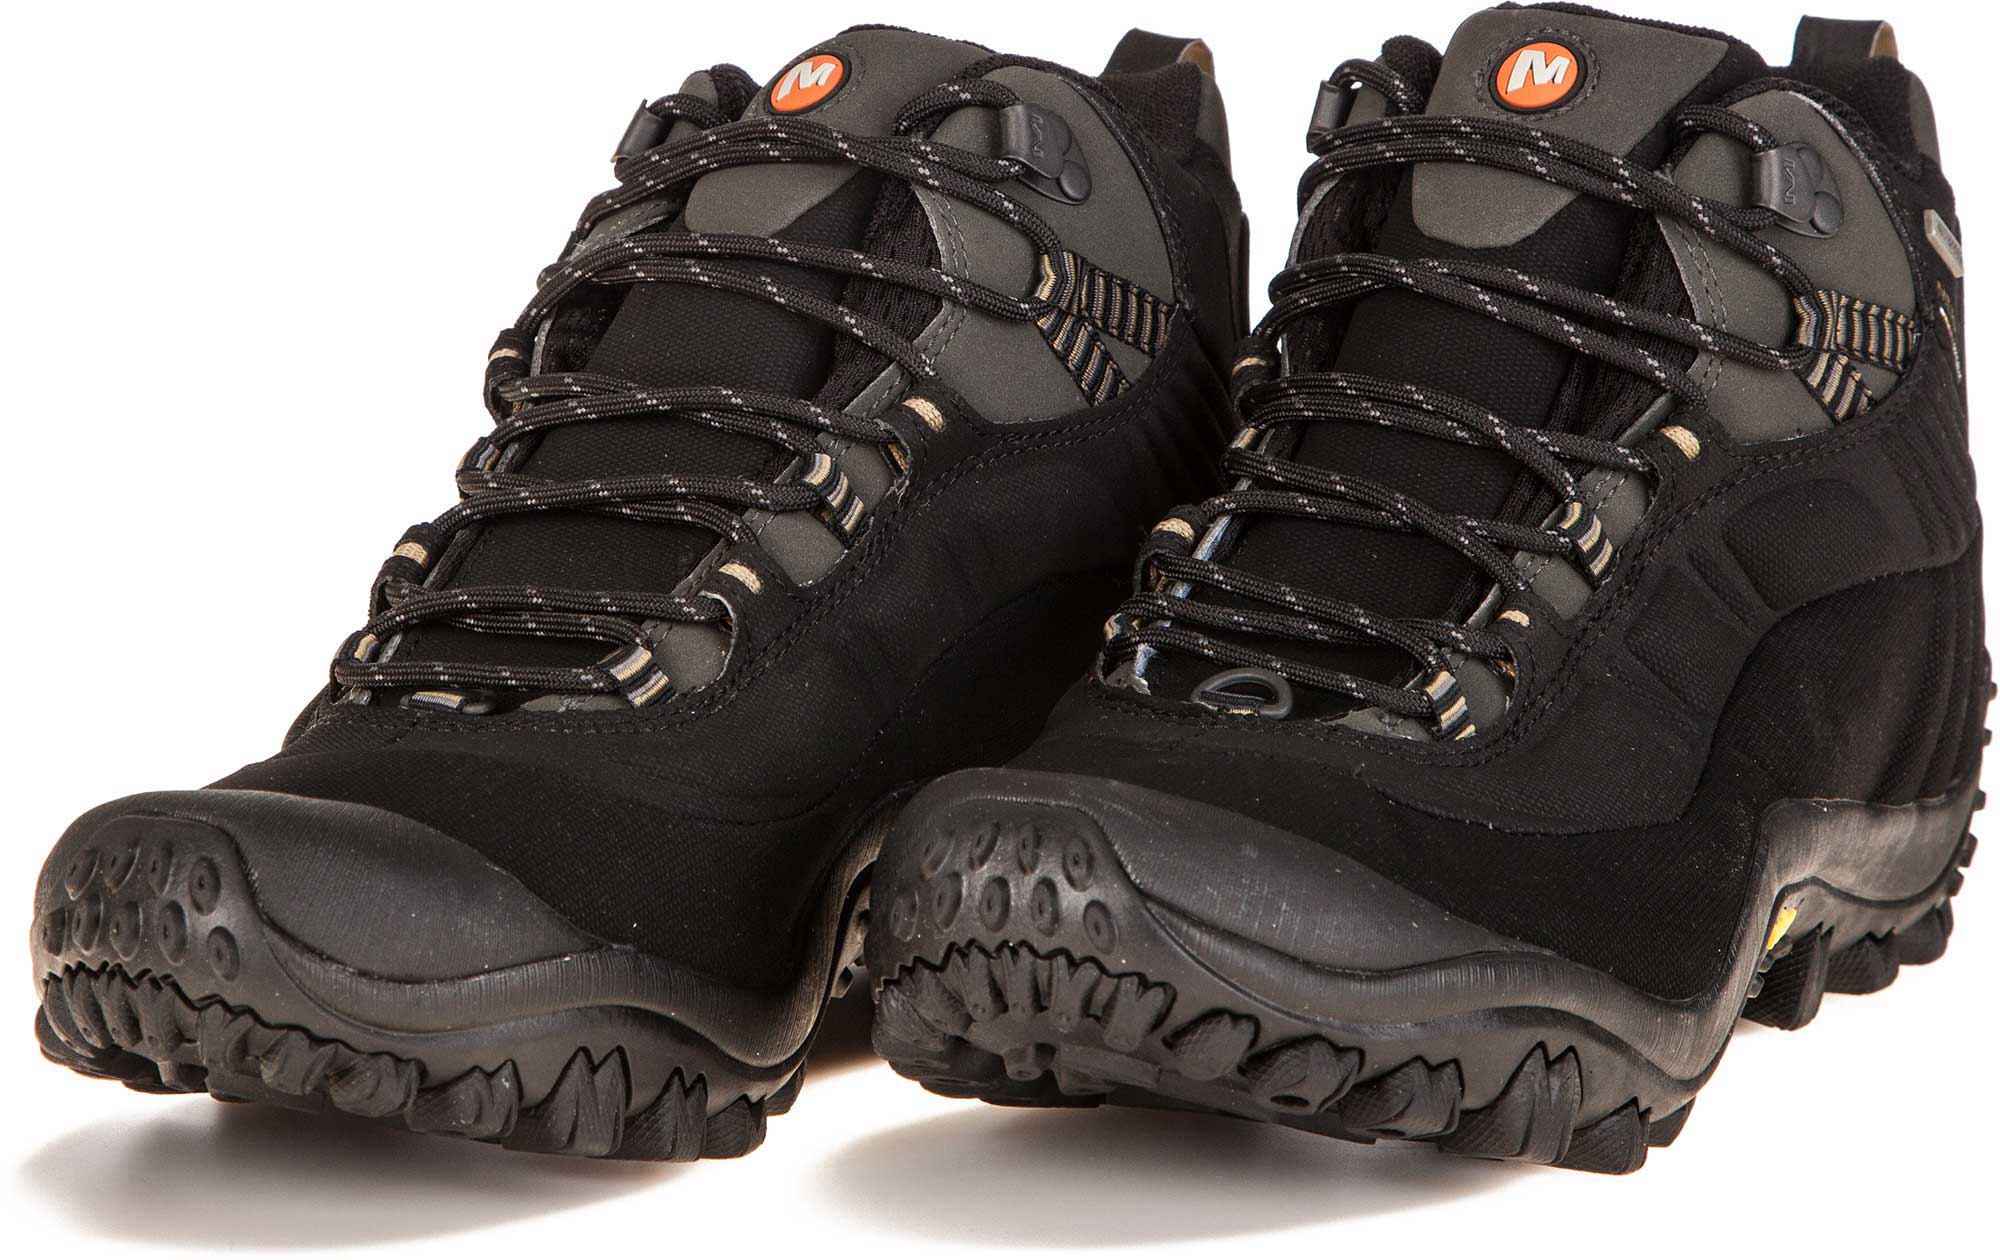 CHAMELEON THERMO 6 W/P - Men's Winter Outdoor Shoes